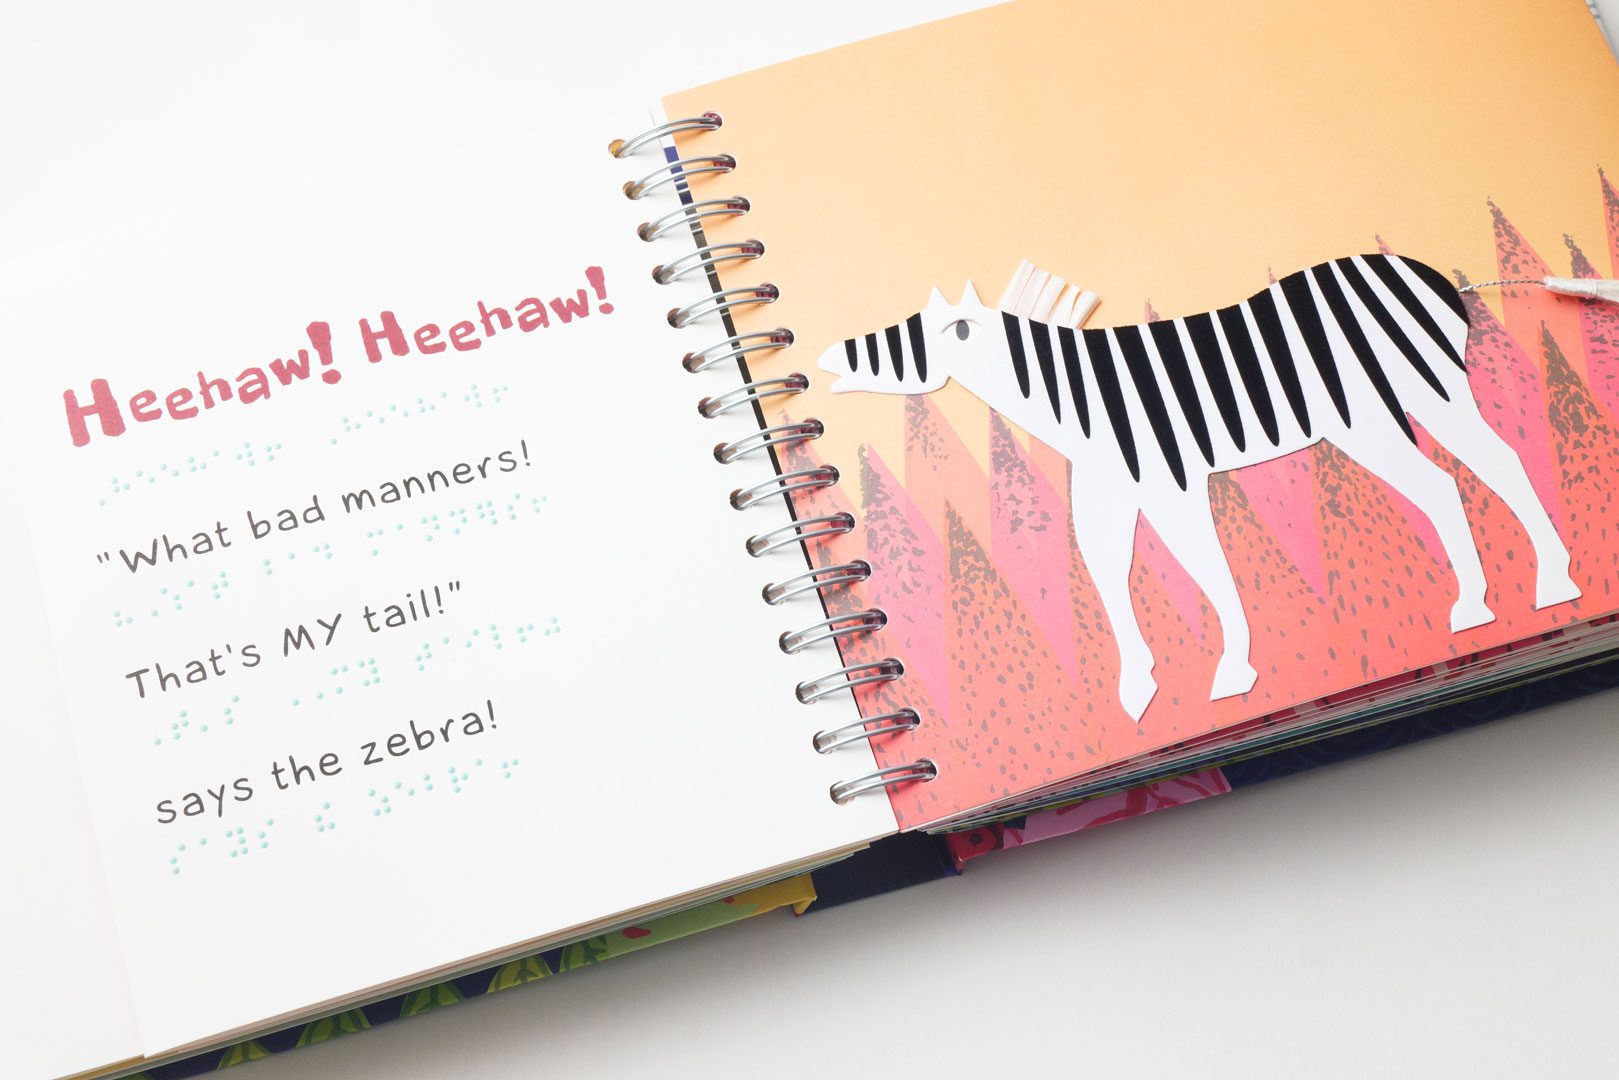 The book is opened to show two pages. On the left-hand page in large pink text reads, “Heehaw! Heehaw!.” Underneath that in large text reads, ““What bad manners! That’s MY tail!” says the zebra!” Under each line of large print text is the braille translation. On the right-hand page is a white and black striped zebra on top of a peach and pink background. The zebra’s tail is made from rope and a small white brush.